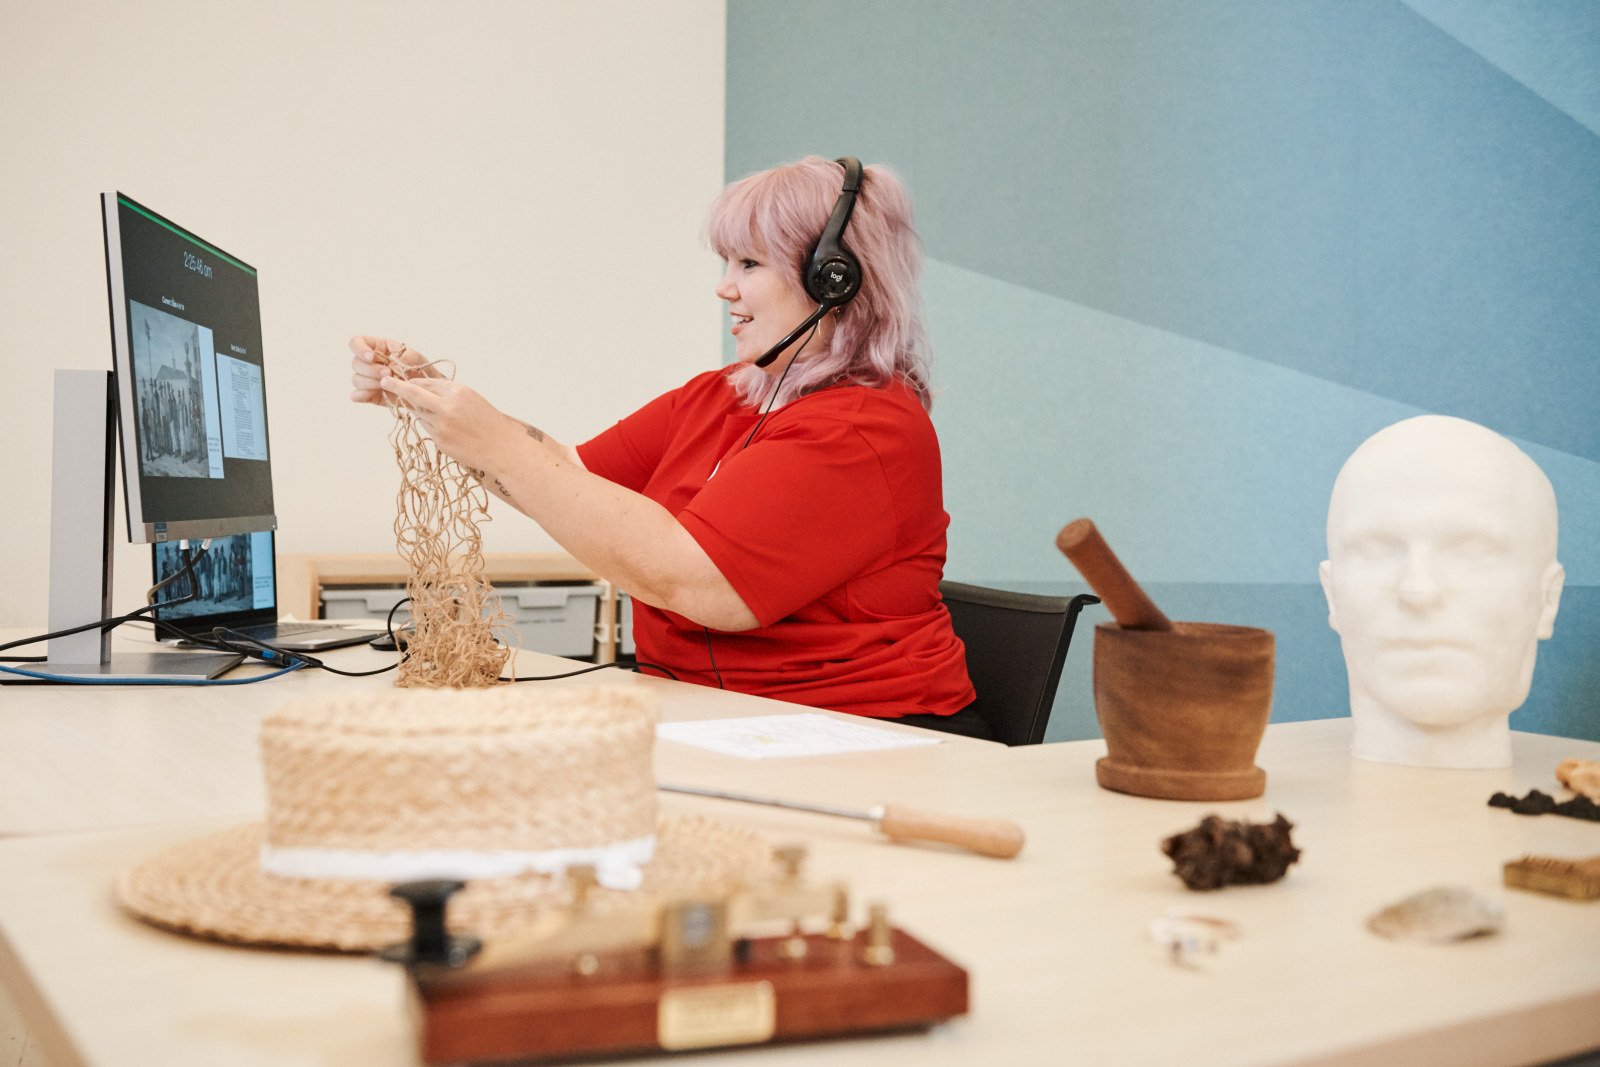 Zoe Kellam, Curriculum Program Deliverer, hosts a virtual excursion from the learning space at the Hyde Park Barracks. She sits in front of a monitor and laptop and is surrounded by historical objects.